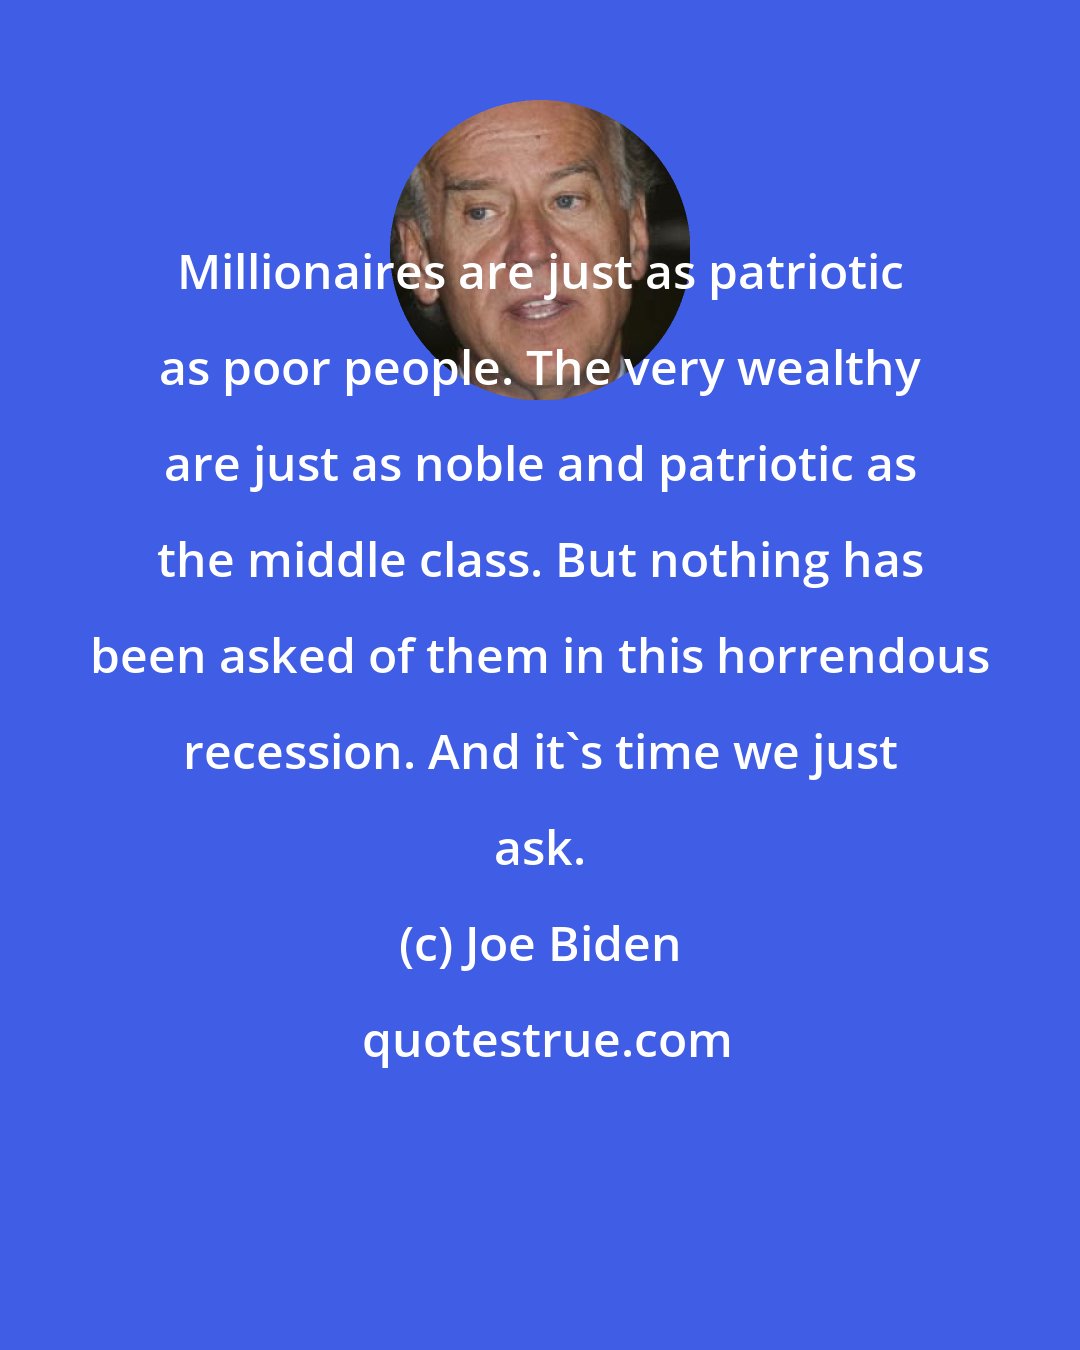 Joe Biden: Millionaires are just as patriotic as poor people. The very wealthy are just as noble and patriotic as the middle class. But nothing has been asked of them in this horrendous recession. And it's time we just ask.